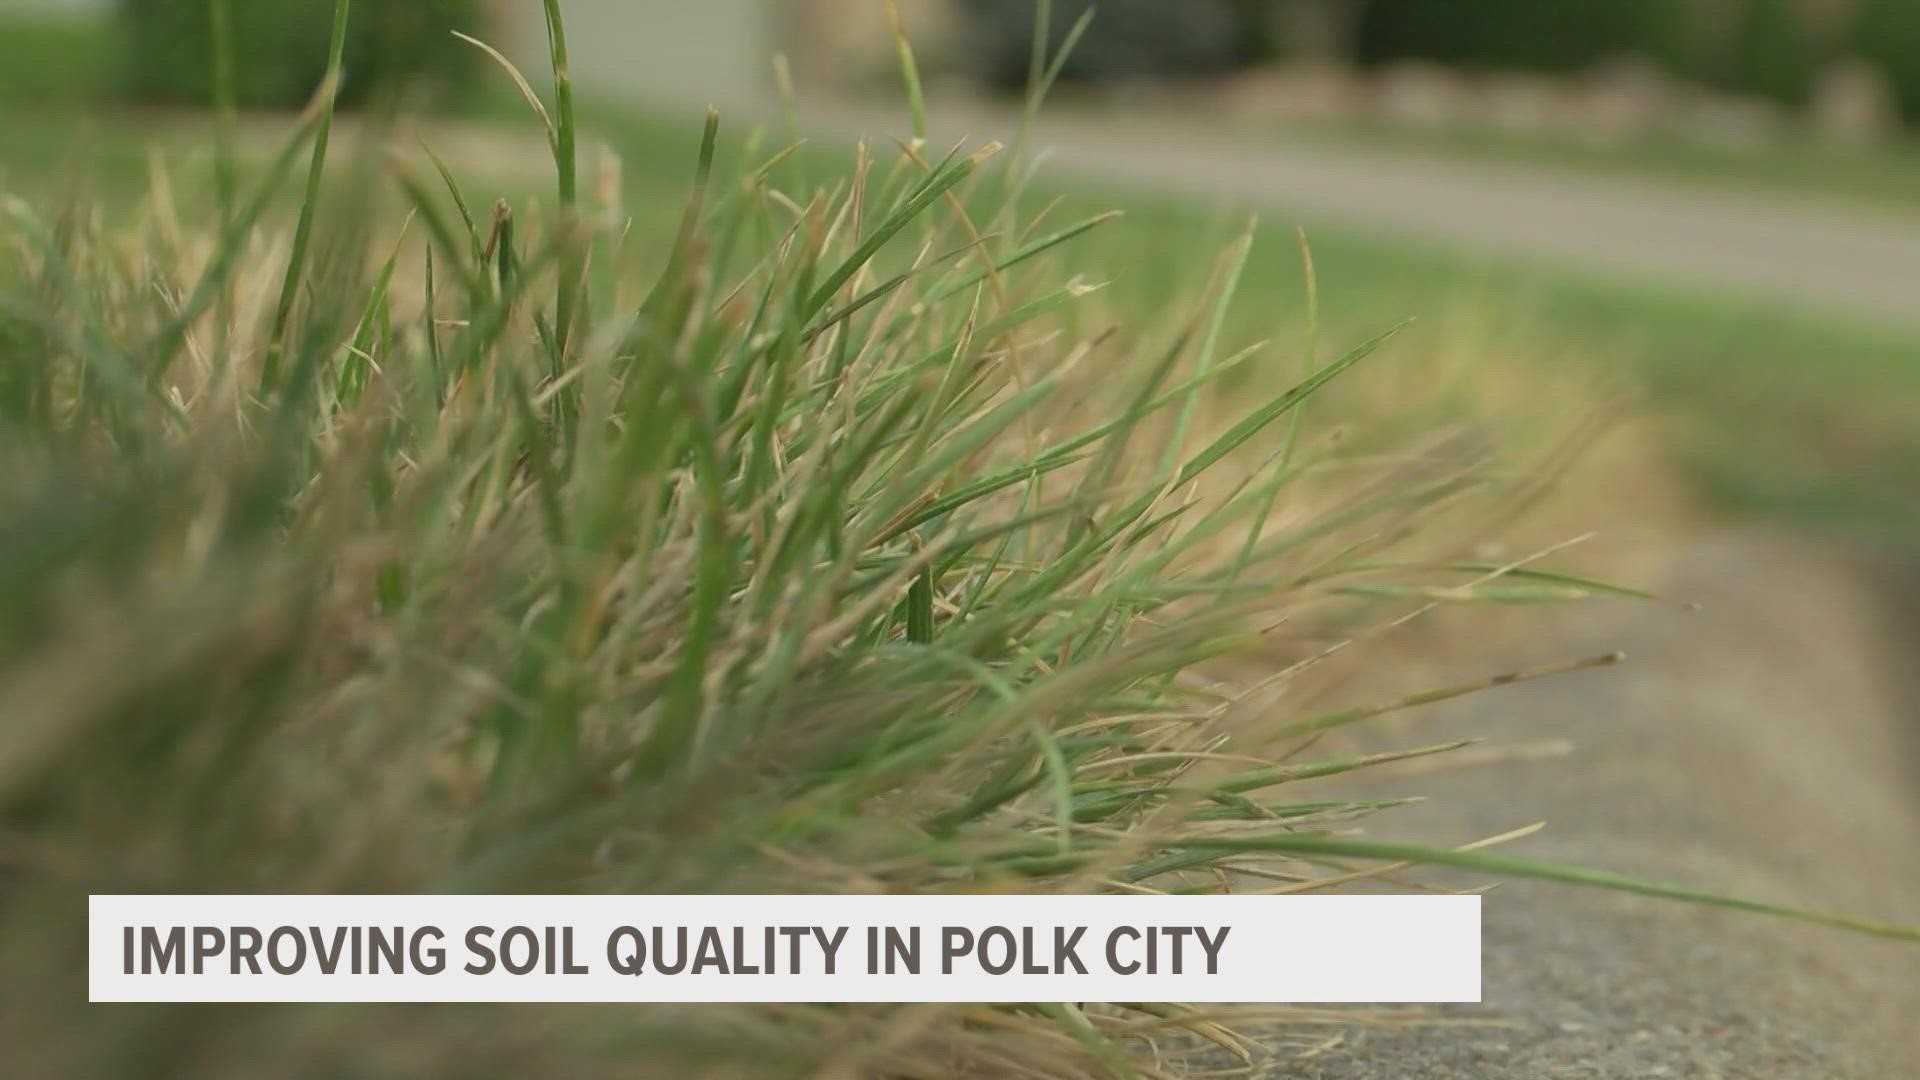 When soil quality isn't very good, water can't penetrate very well and ends up running off instead of helping your grass grow.